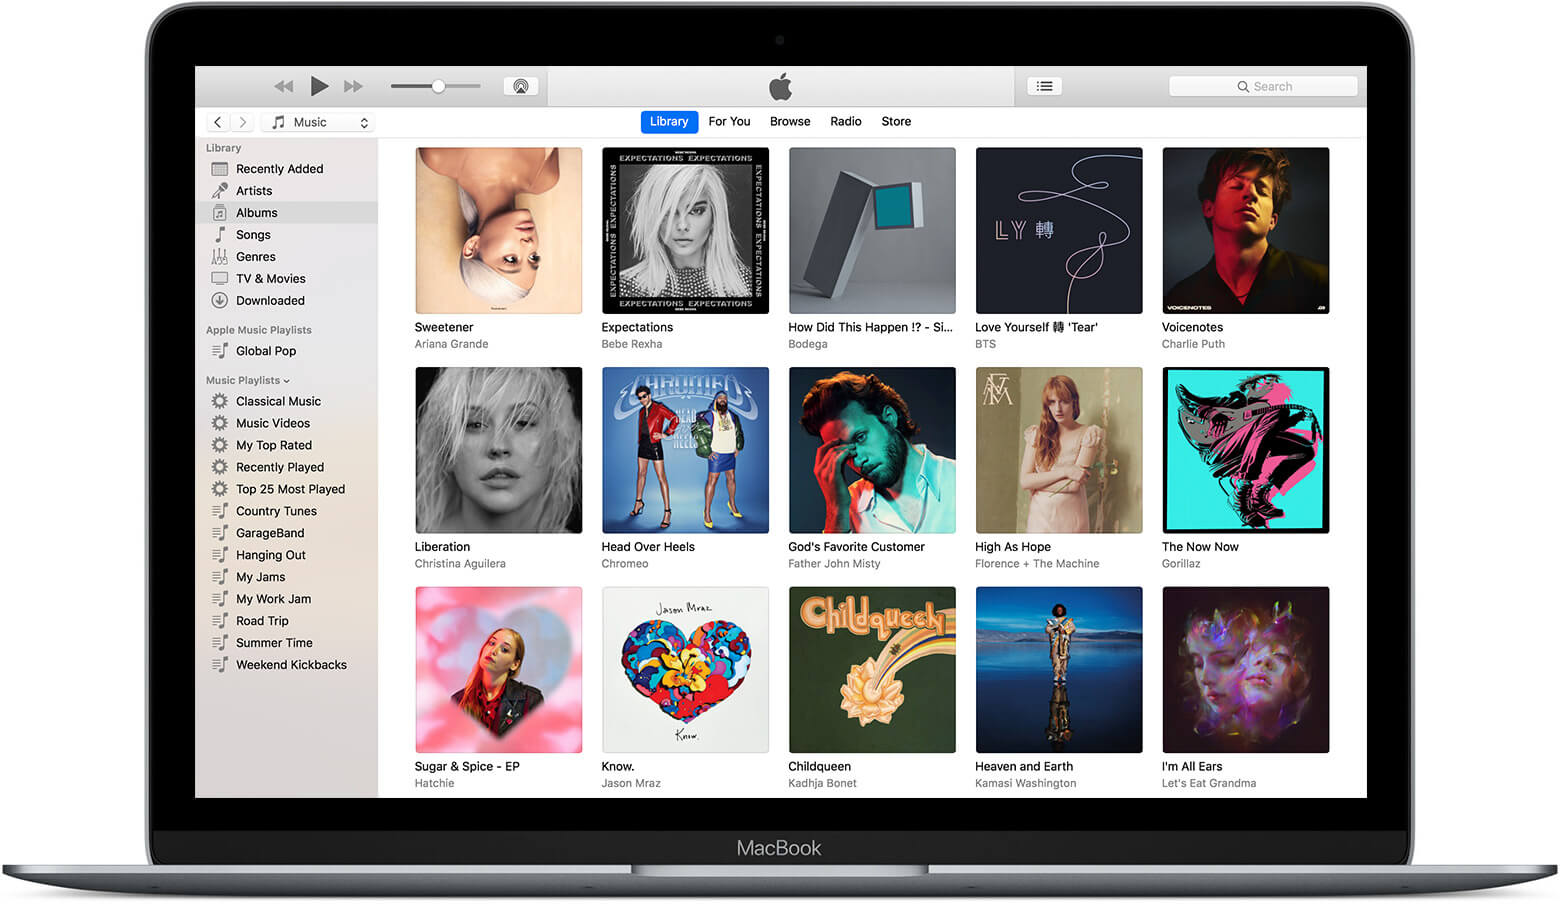  is-iTunes-the-same-as-Apple-music-features-iTunes  